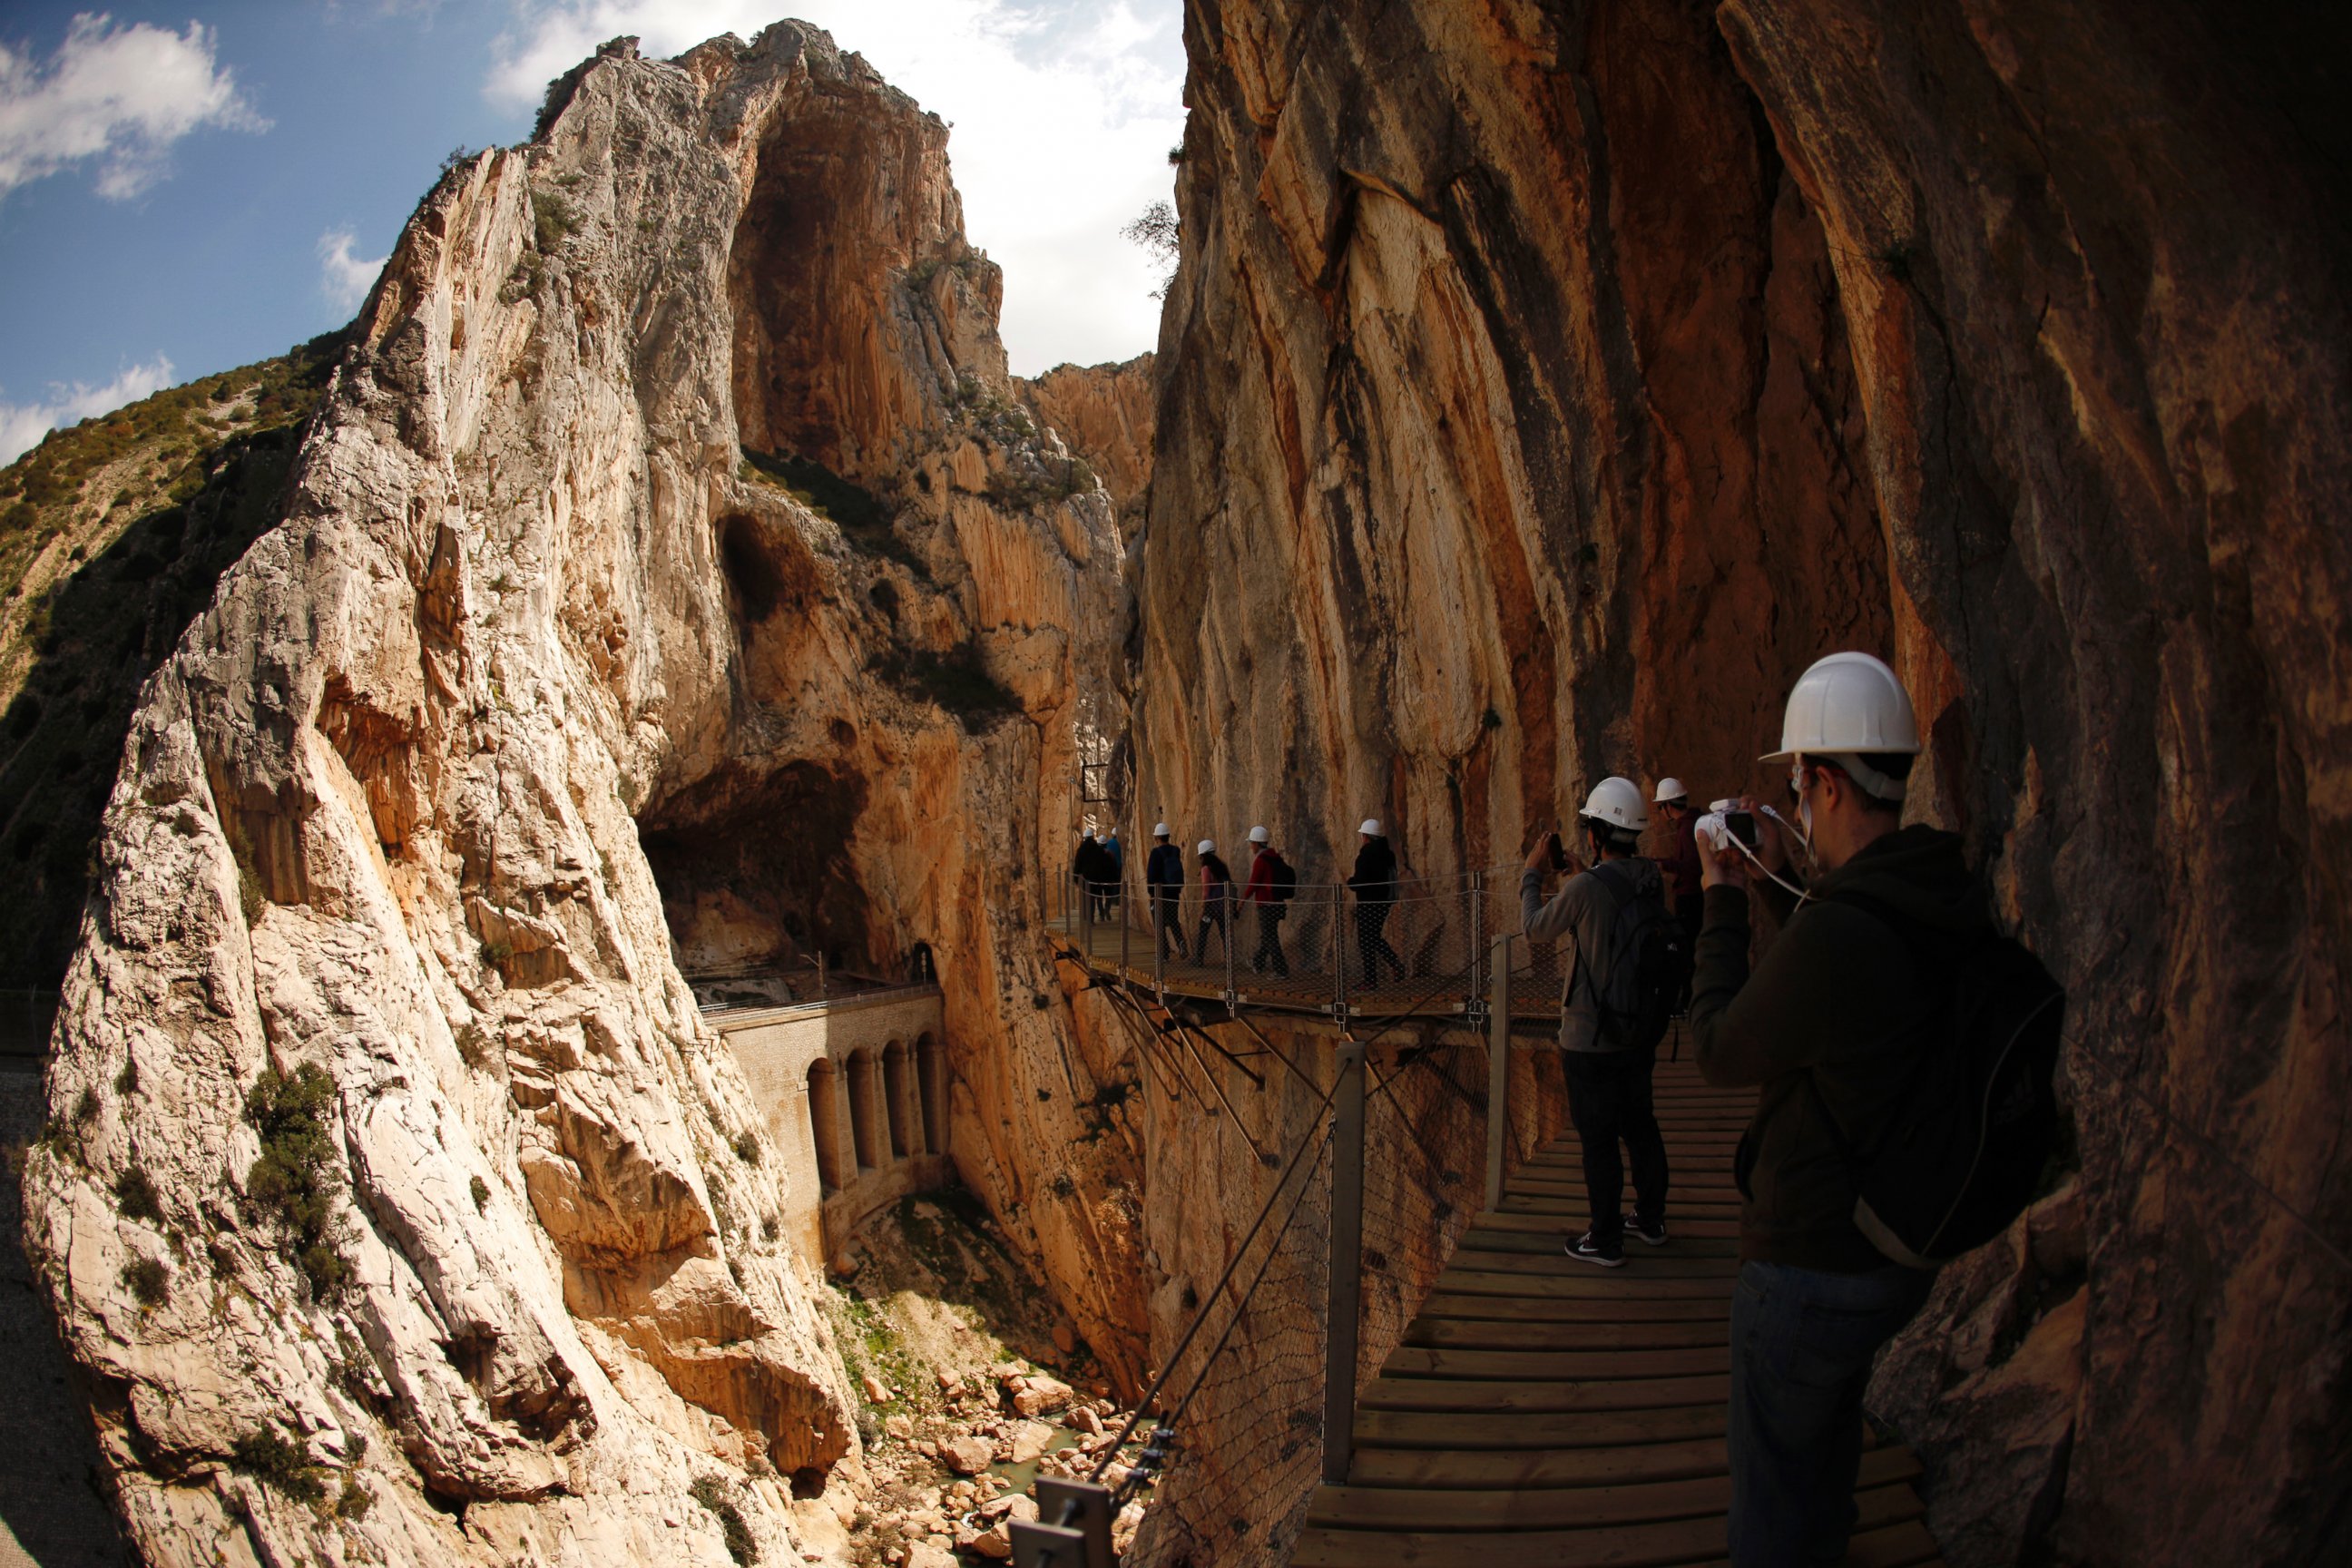 PHOTO: Journalists walk along the new Caminito del Rey (The King's Little Pathway) in El Chorro-Alora, near Malaga, southern Spain March 15, 2015.